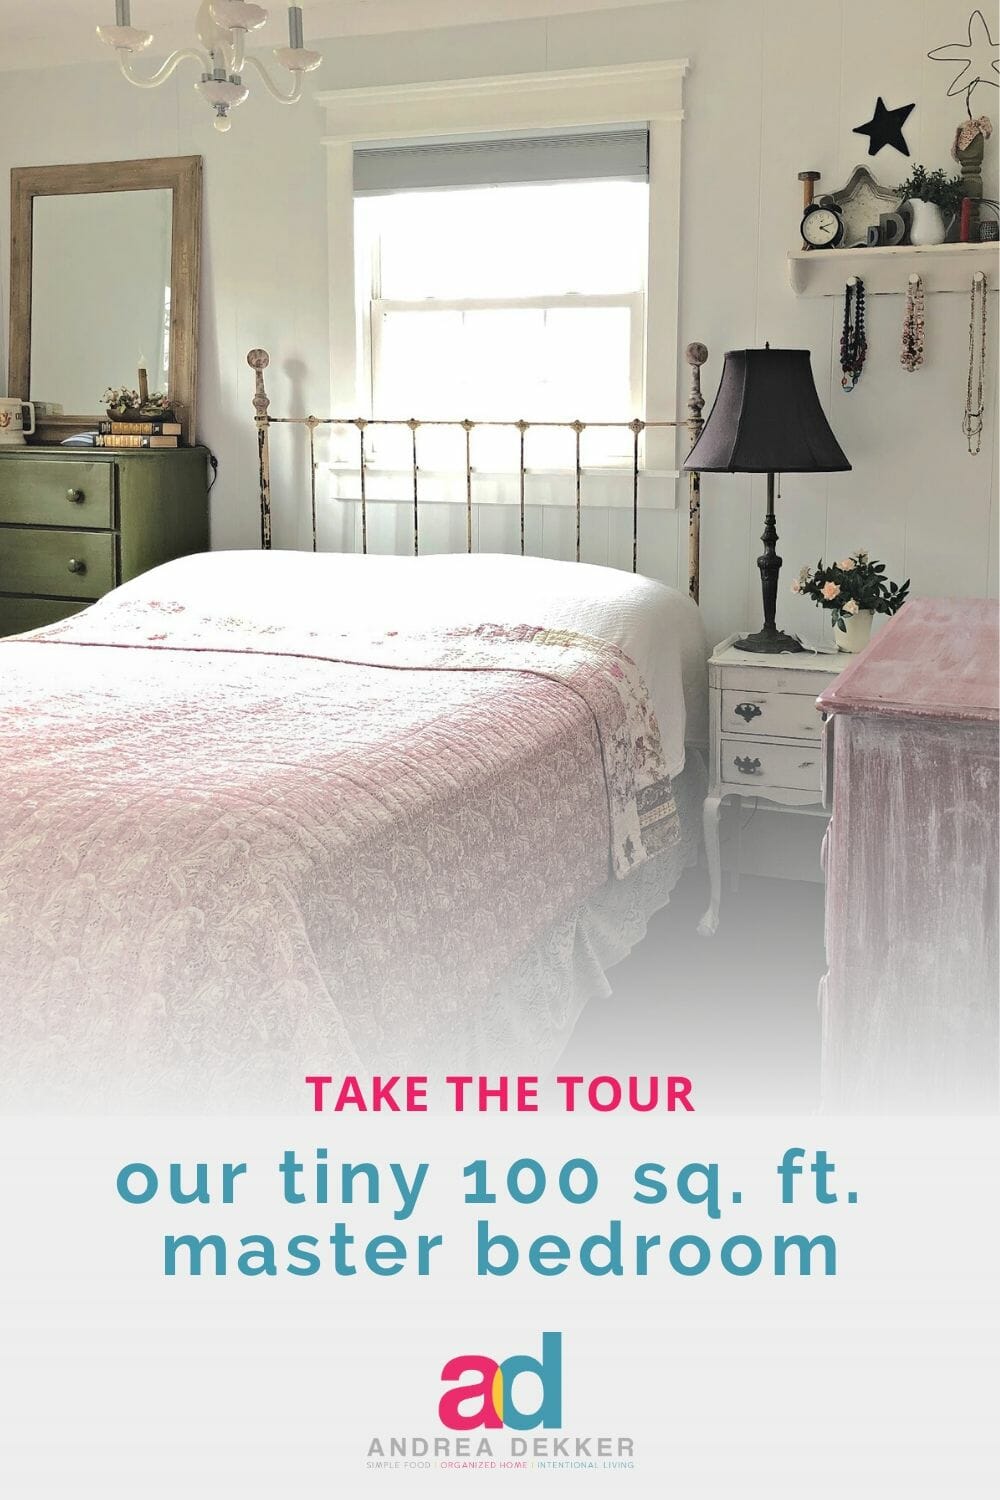 Who says bigger is better? Take a tour of our tiny 100-square-foot master bedroom and see how proper organization allows us to live comfortably in a very small space. via @andreadekker